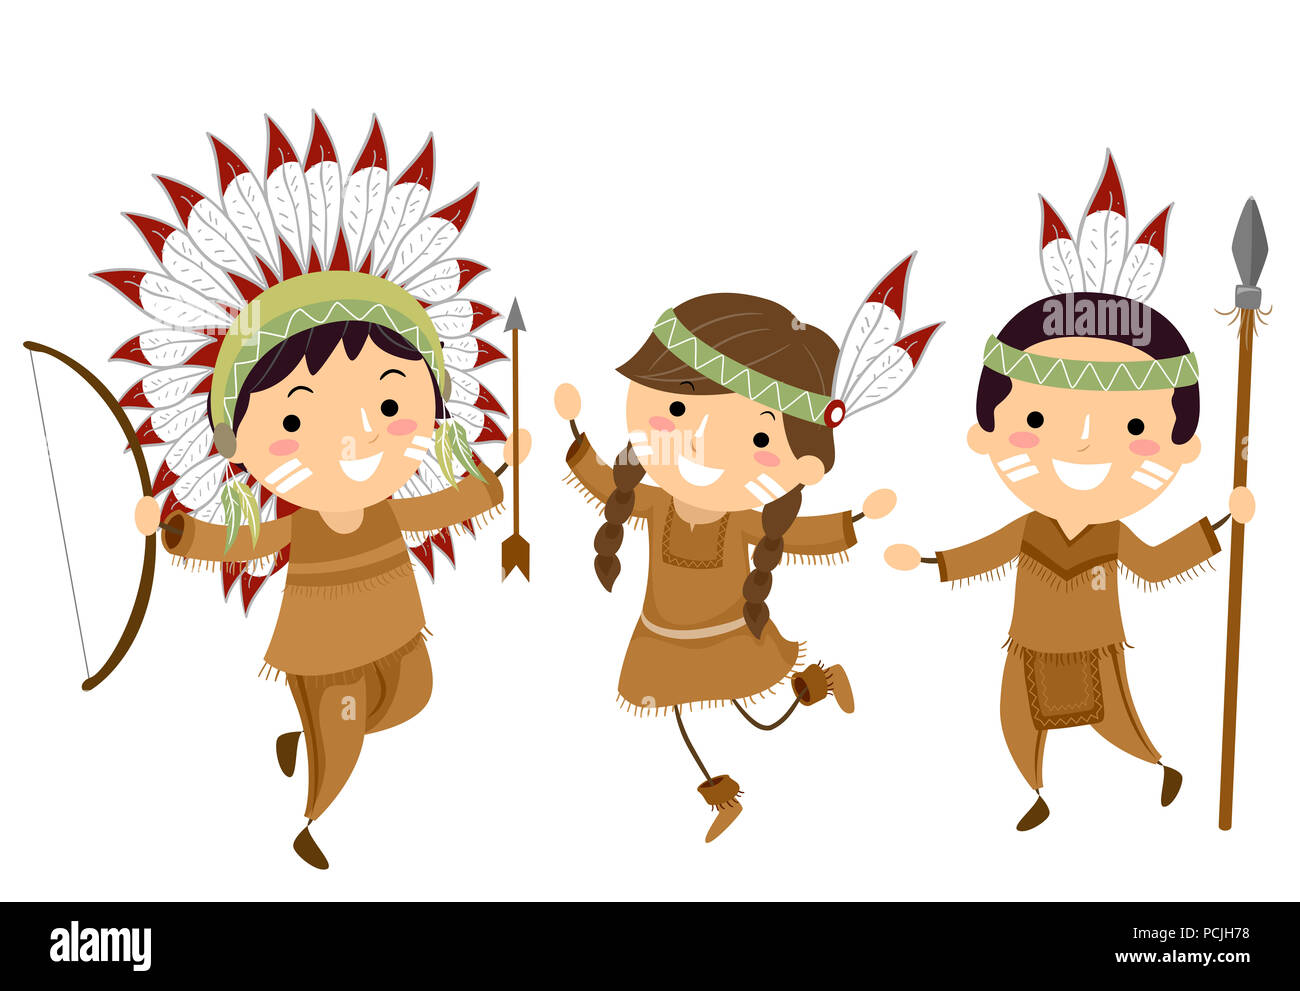 Illustration of Stickman Kids Wearing Native American Indian Clothes and Holding Hunting Tools Stock Photo